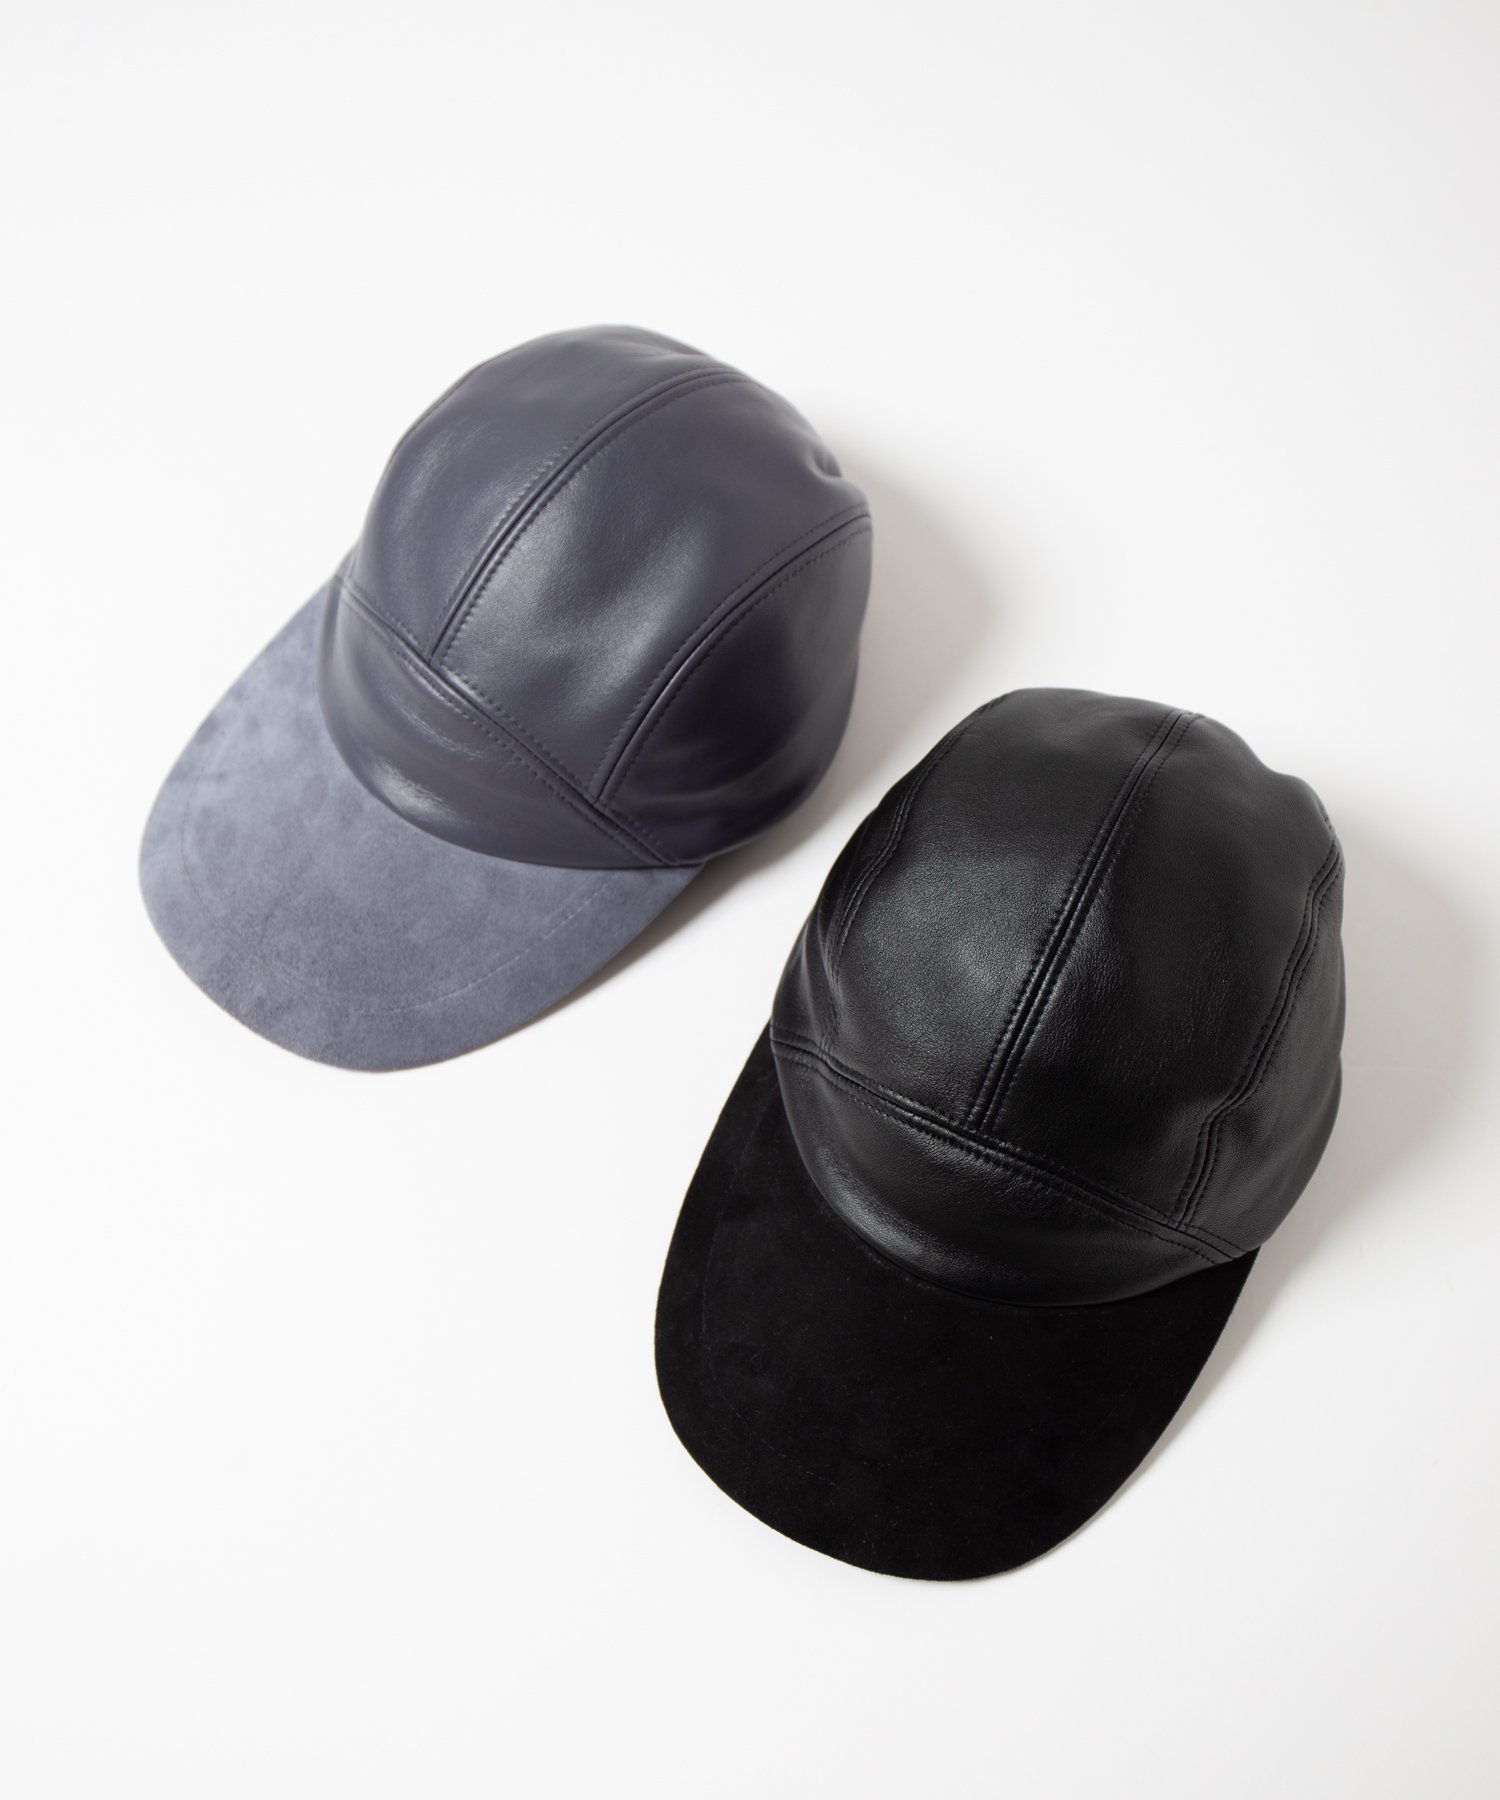 <img class='new_mark_img1' src='https://img.shop-pro.jp/img/new/icons15.gif' style='border:none;display:inline;margin:0px;padding:0px;width:auto;' />【Indietro Association】 Leather Jet Cap / レザージェットキャップ